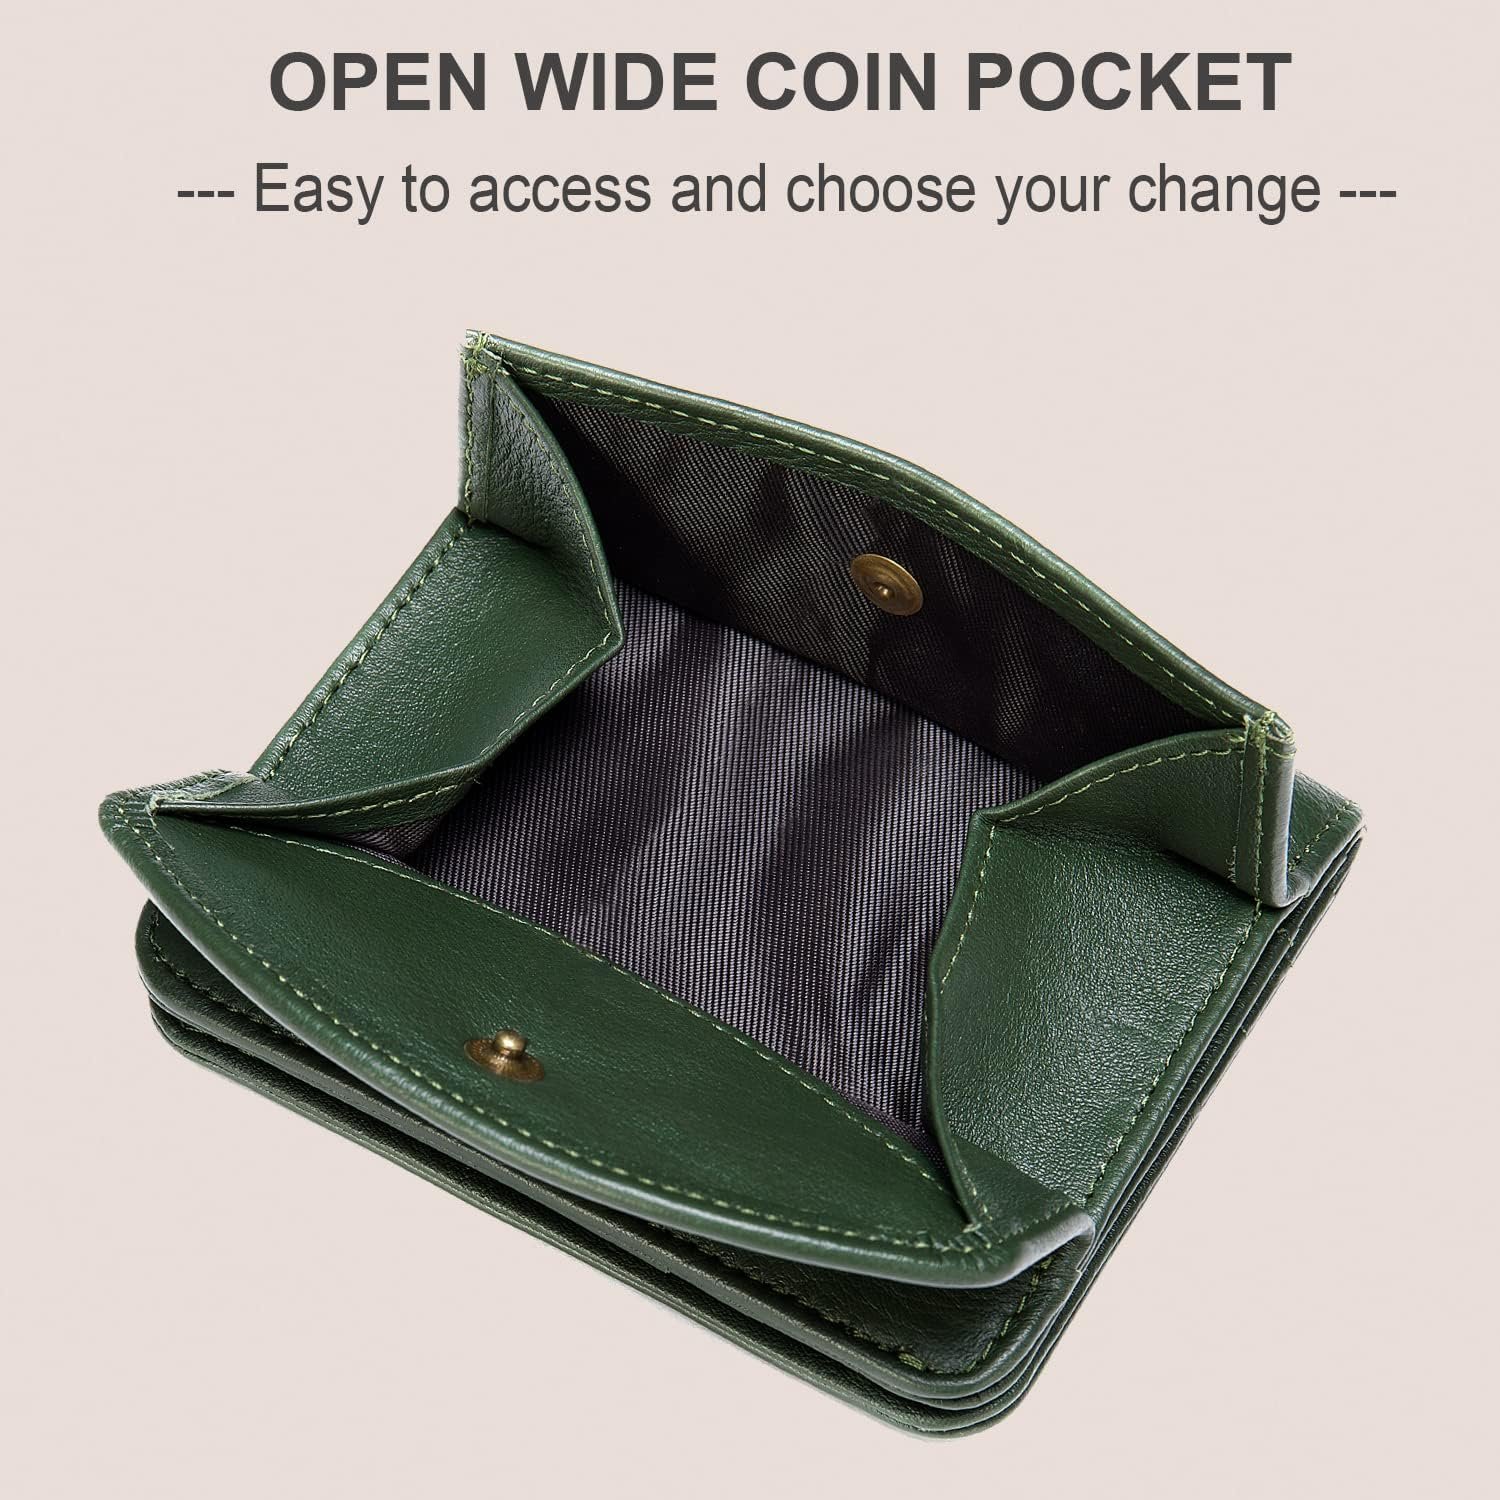 Bifold wallet women, Ultra Slim Women’s Leather Wallets, Thin Compact Ladies Wallet with Coin Pocket Purse (Dark Green)